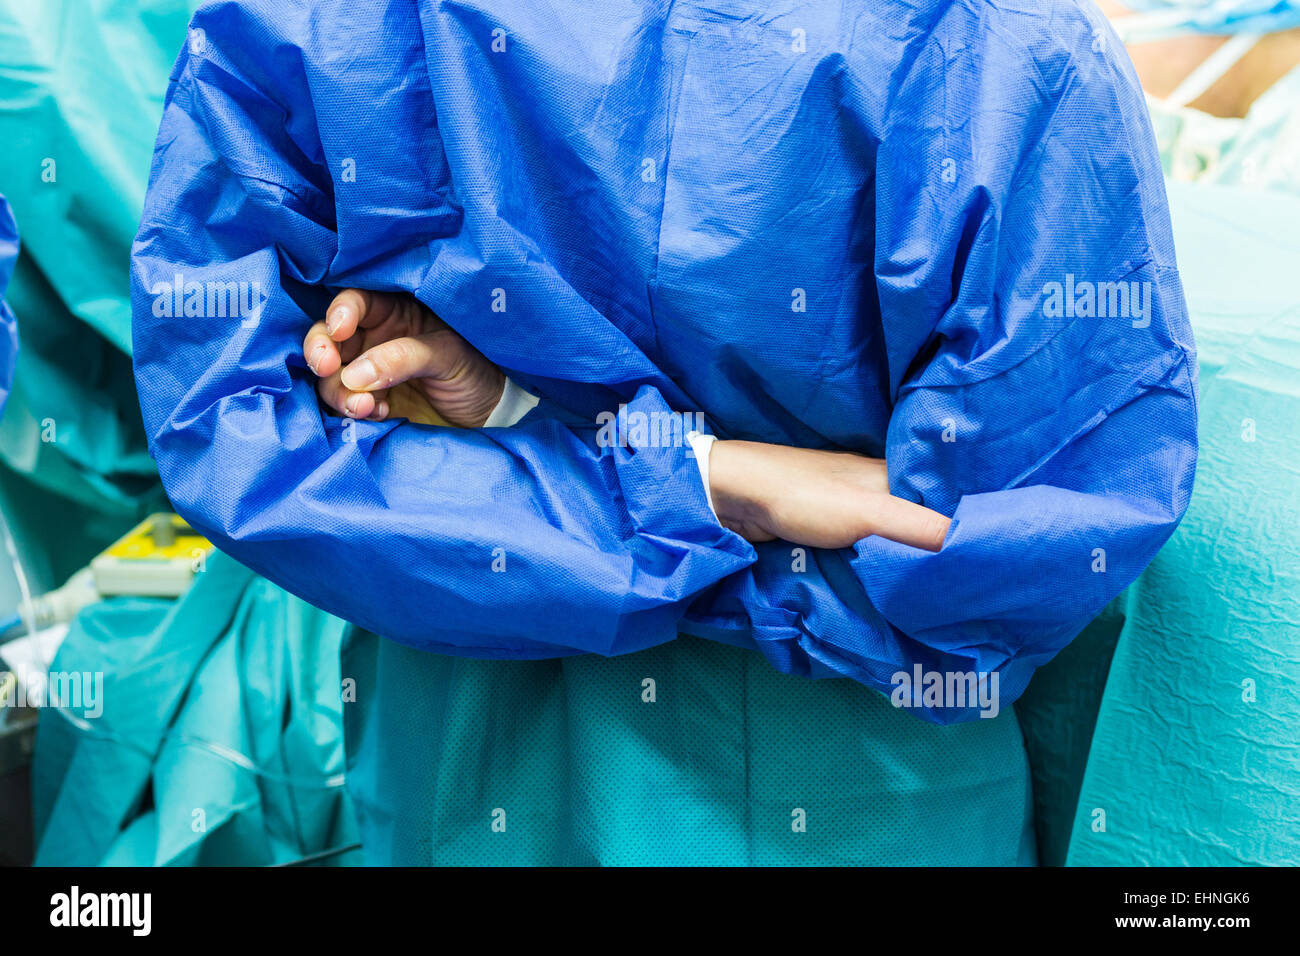 Hospital staff in the operating room. Stock Photo